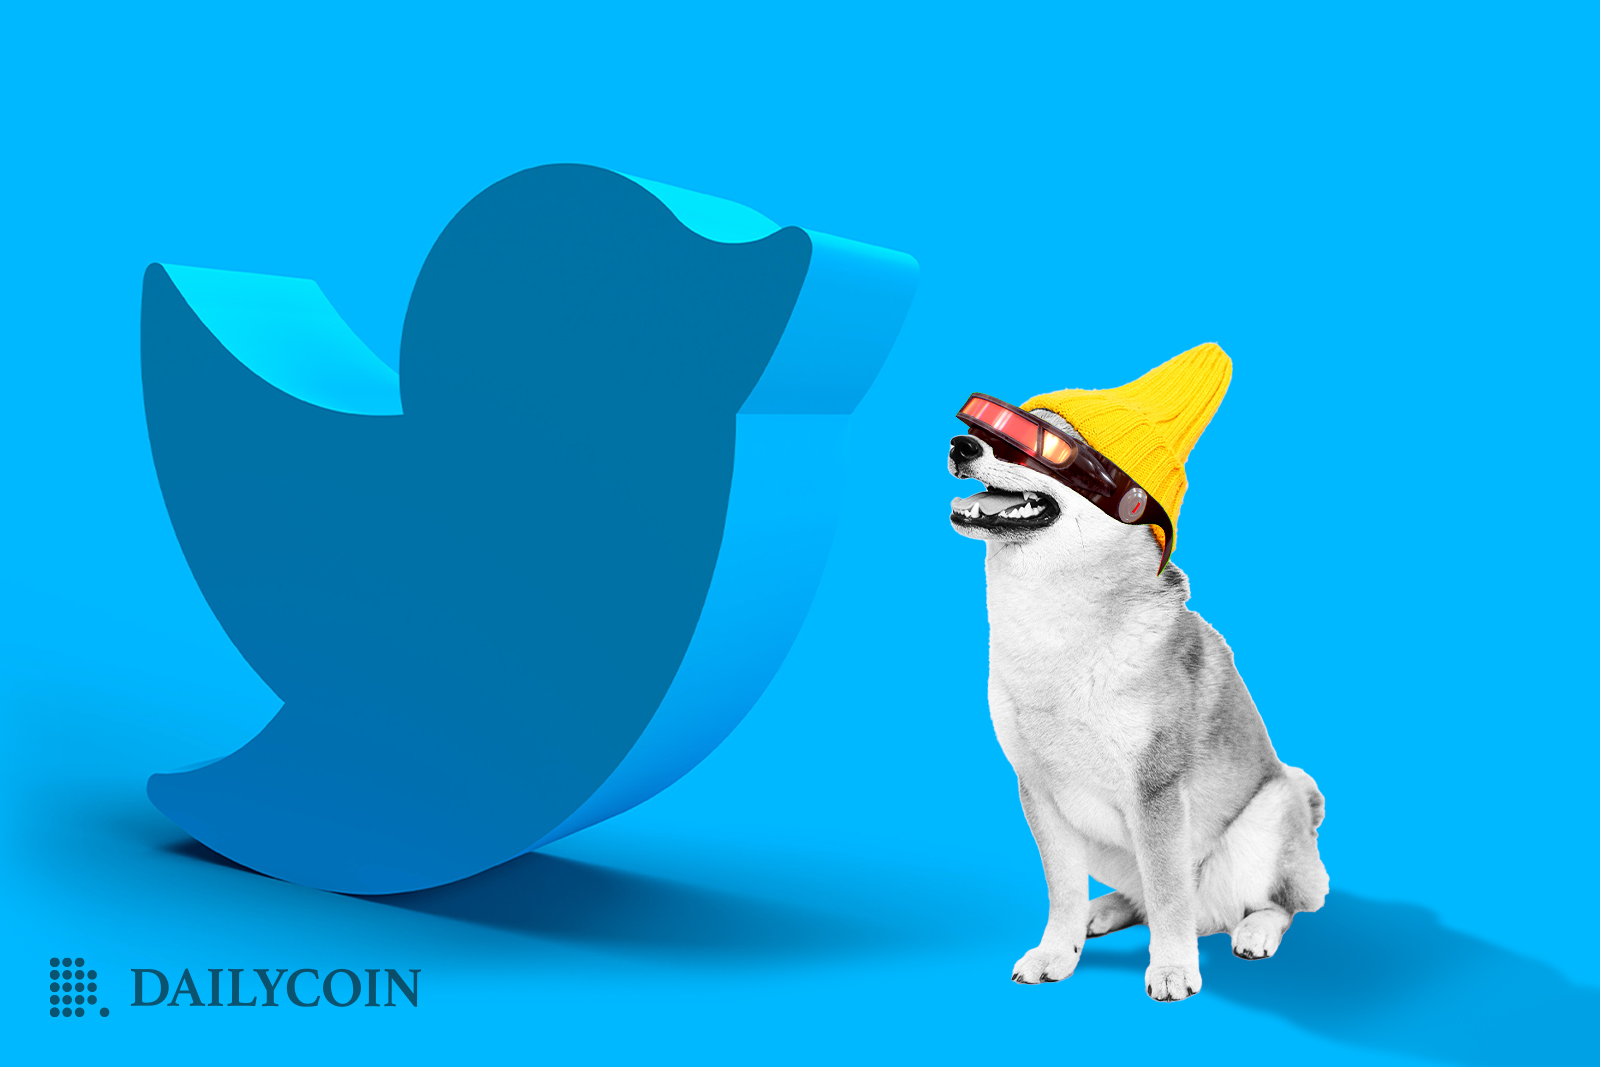 Dog looing at a giant Twitter logo bird